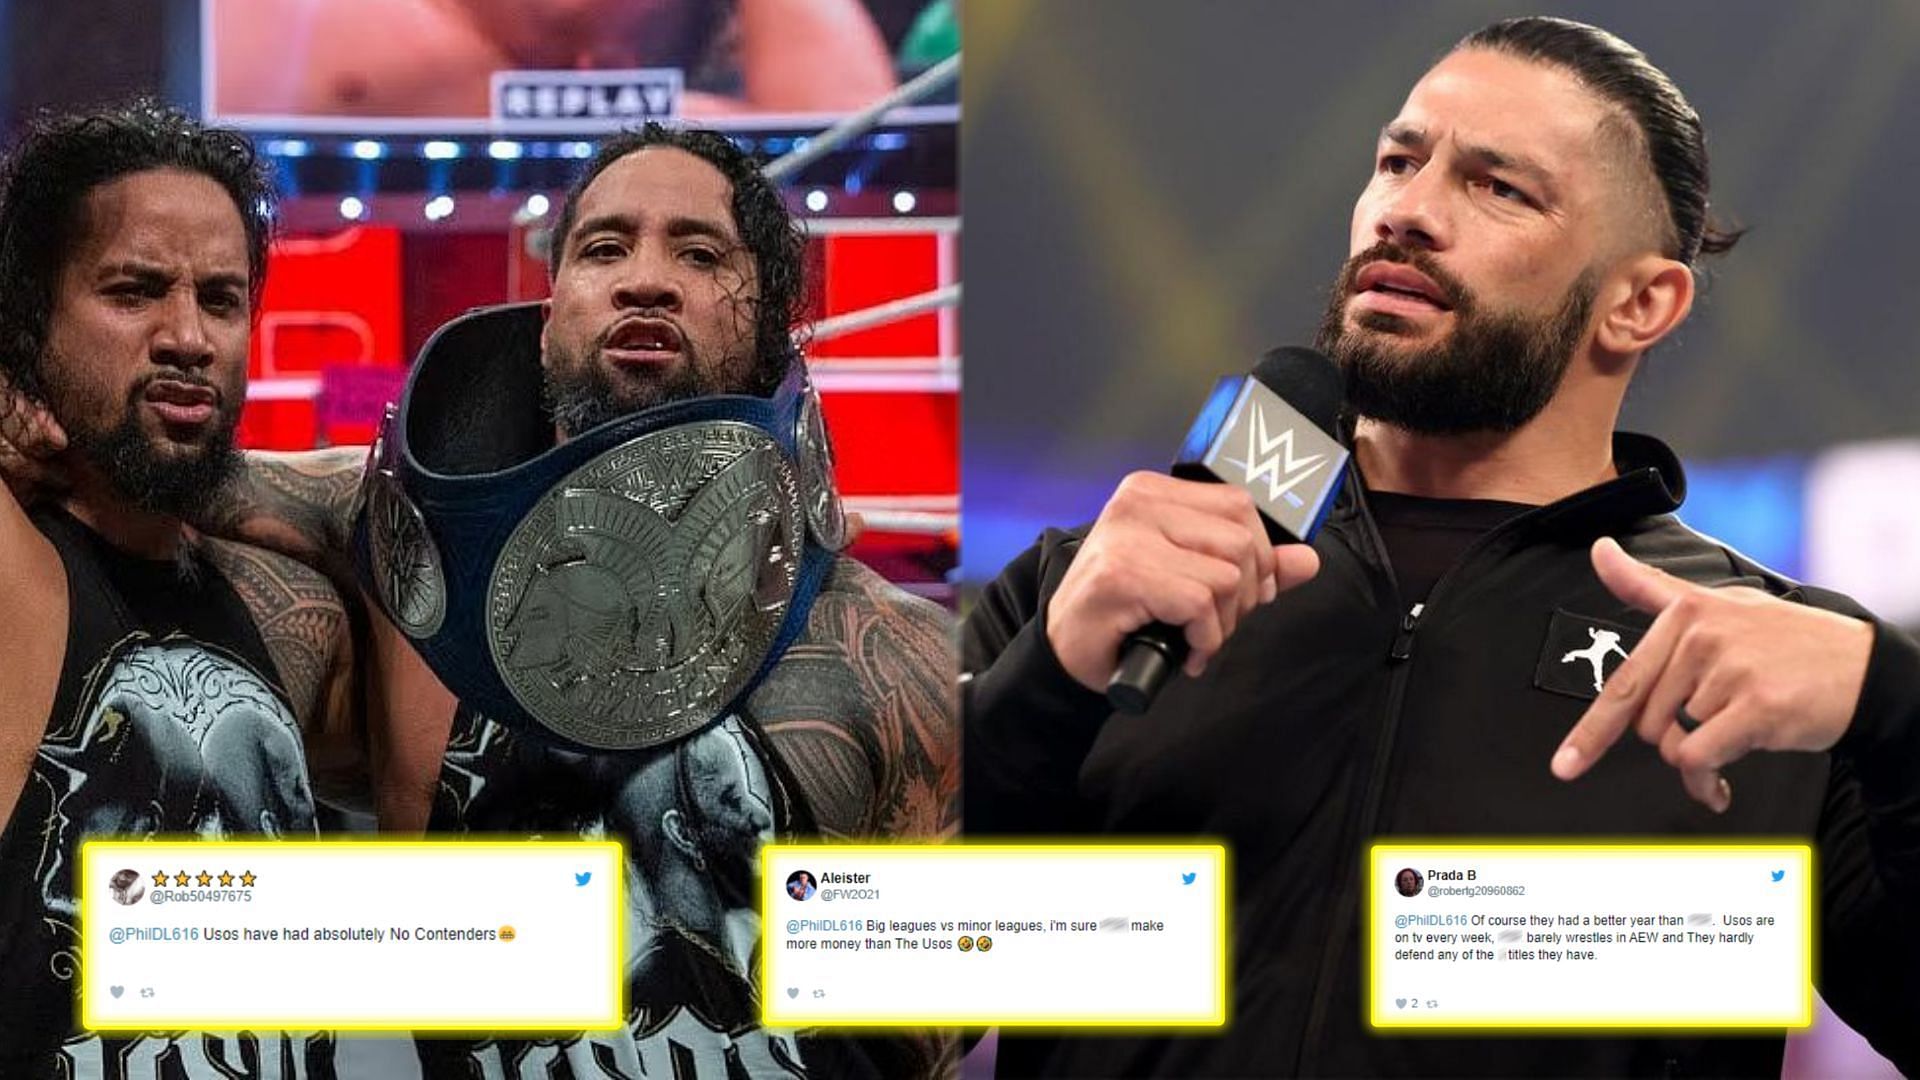 Are The Usos only relevant because of Roman Reigns?